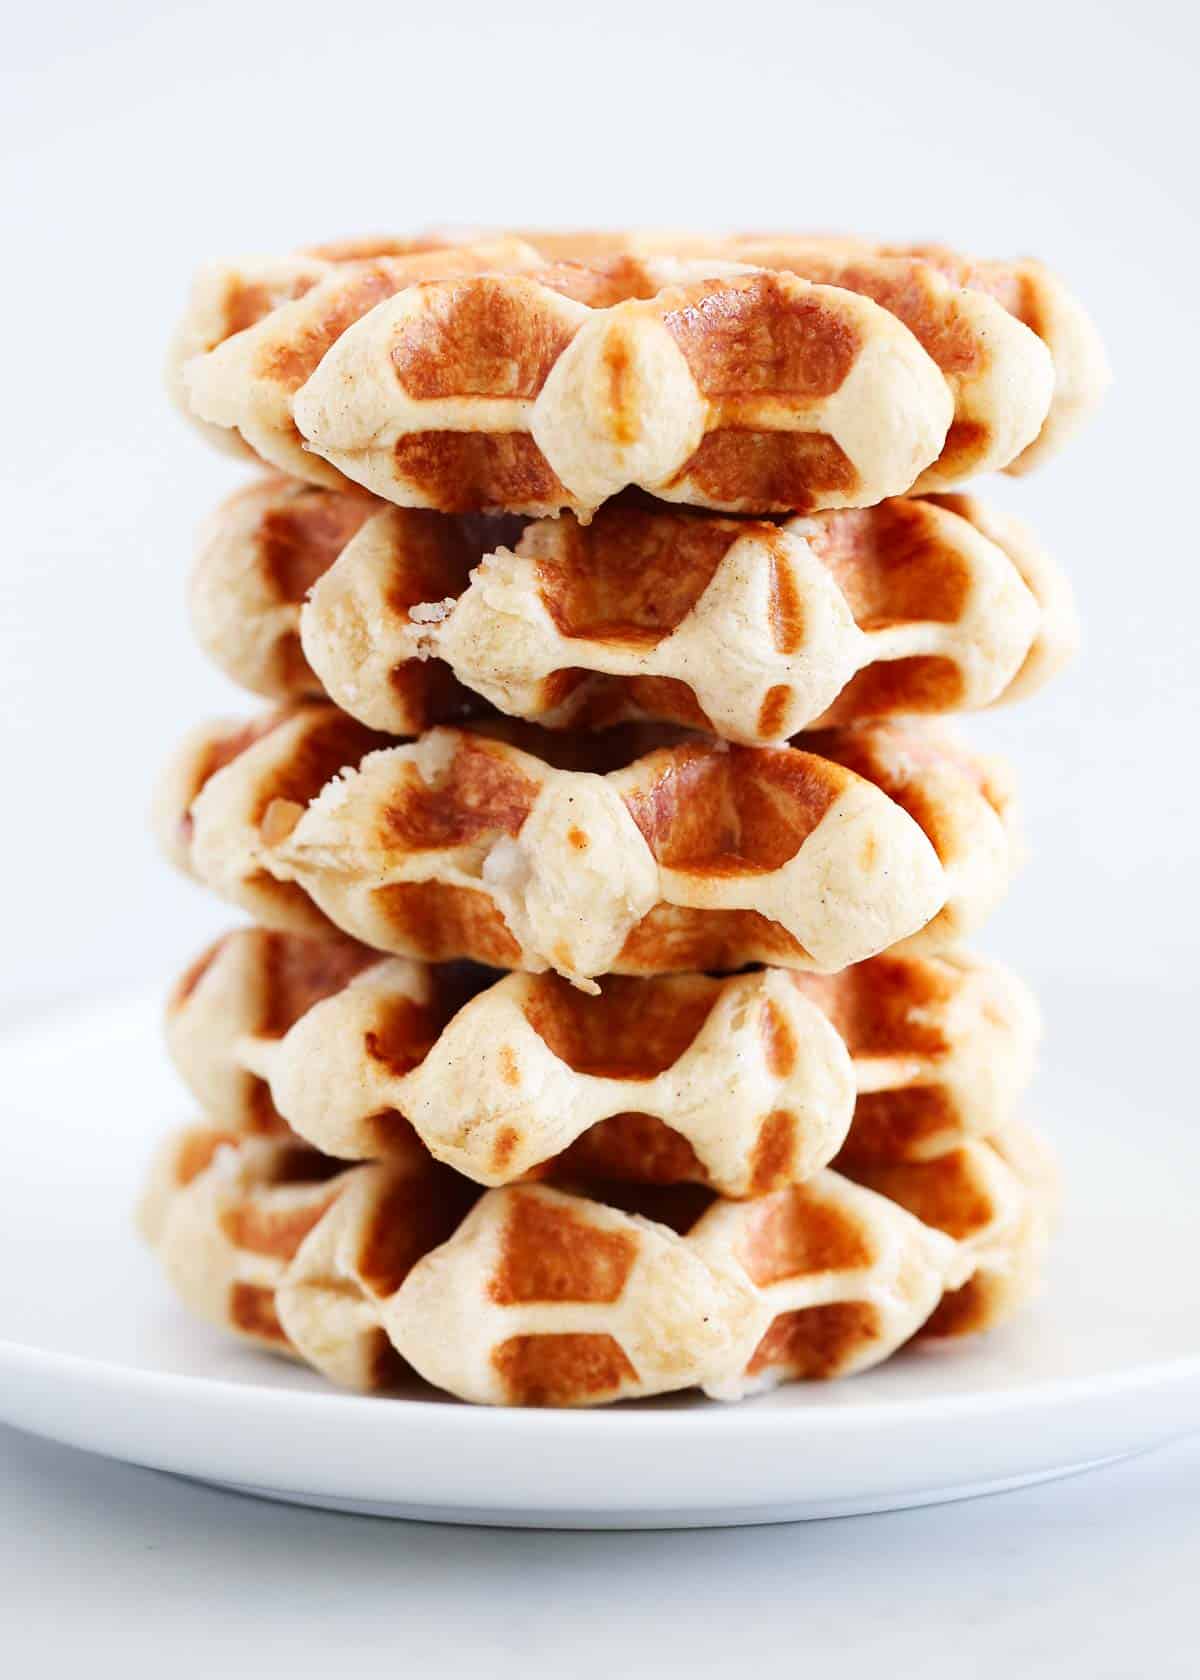 Stack of liege waffles on a white plate.